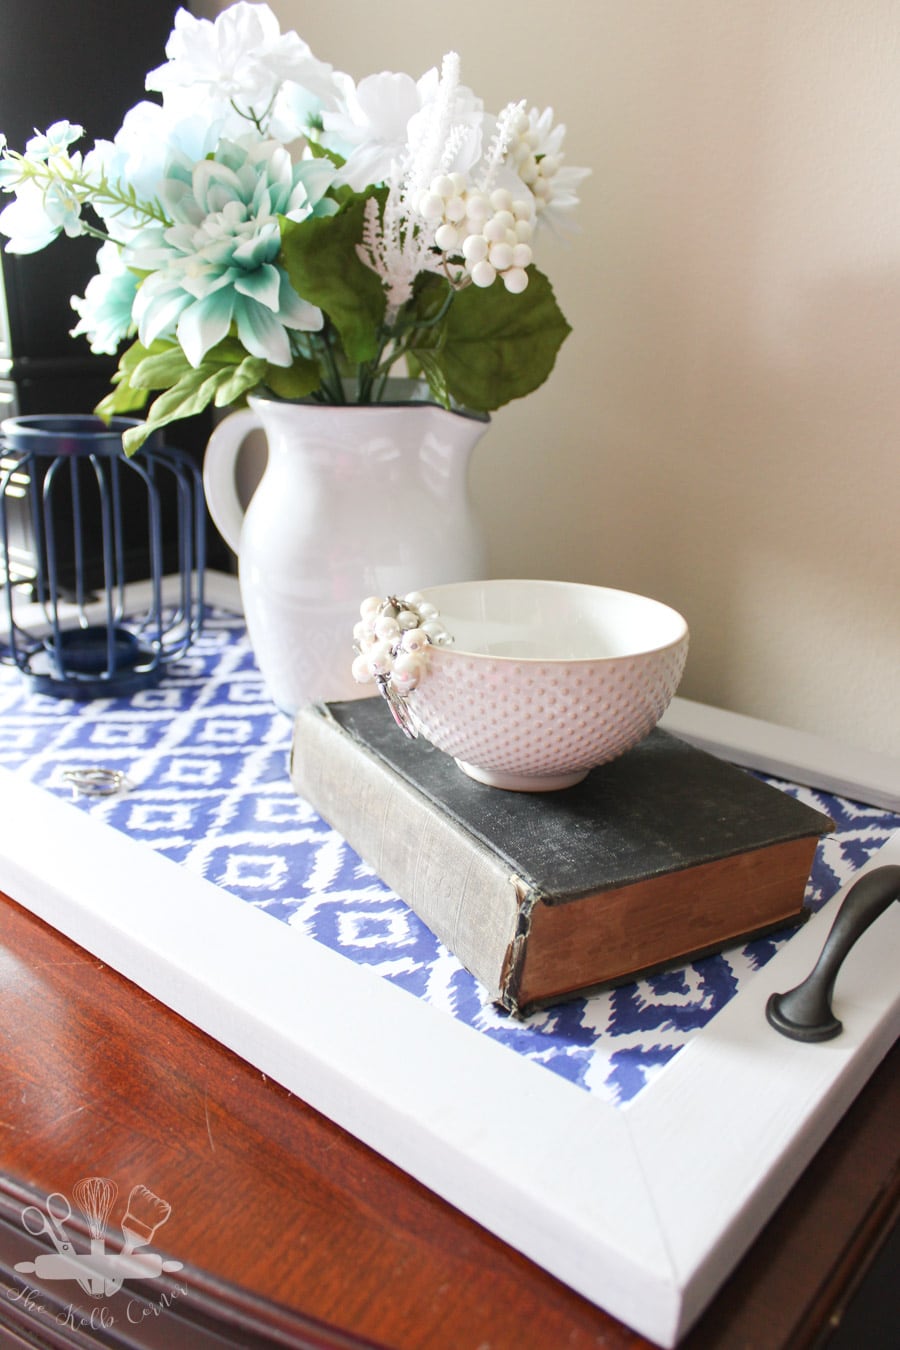 How to Make and Style a Decorative Tray